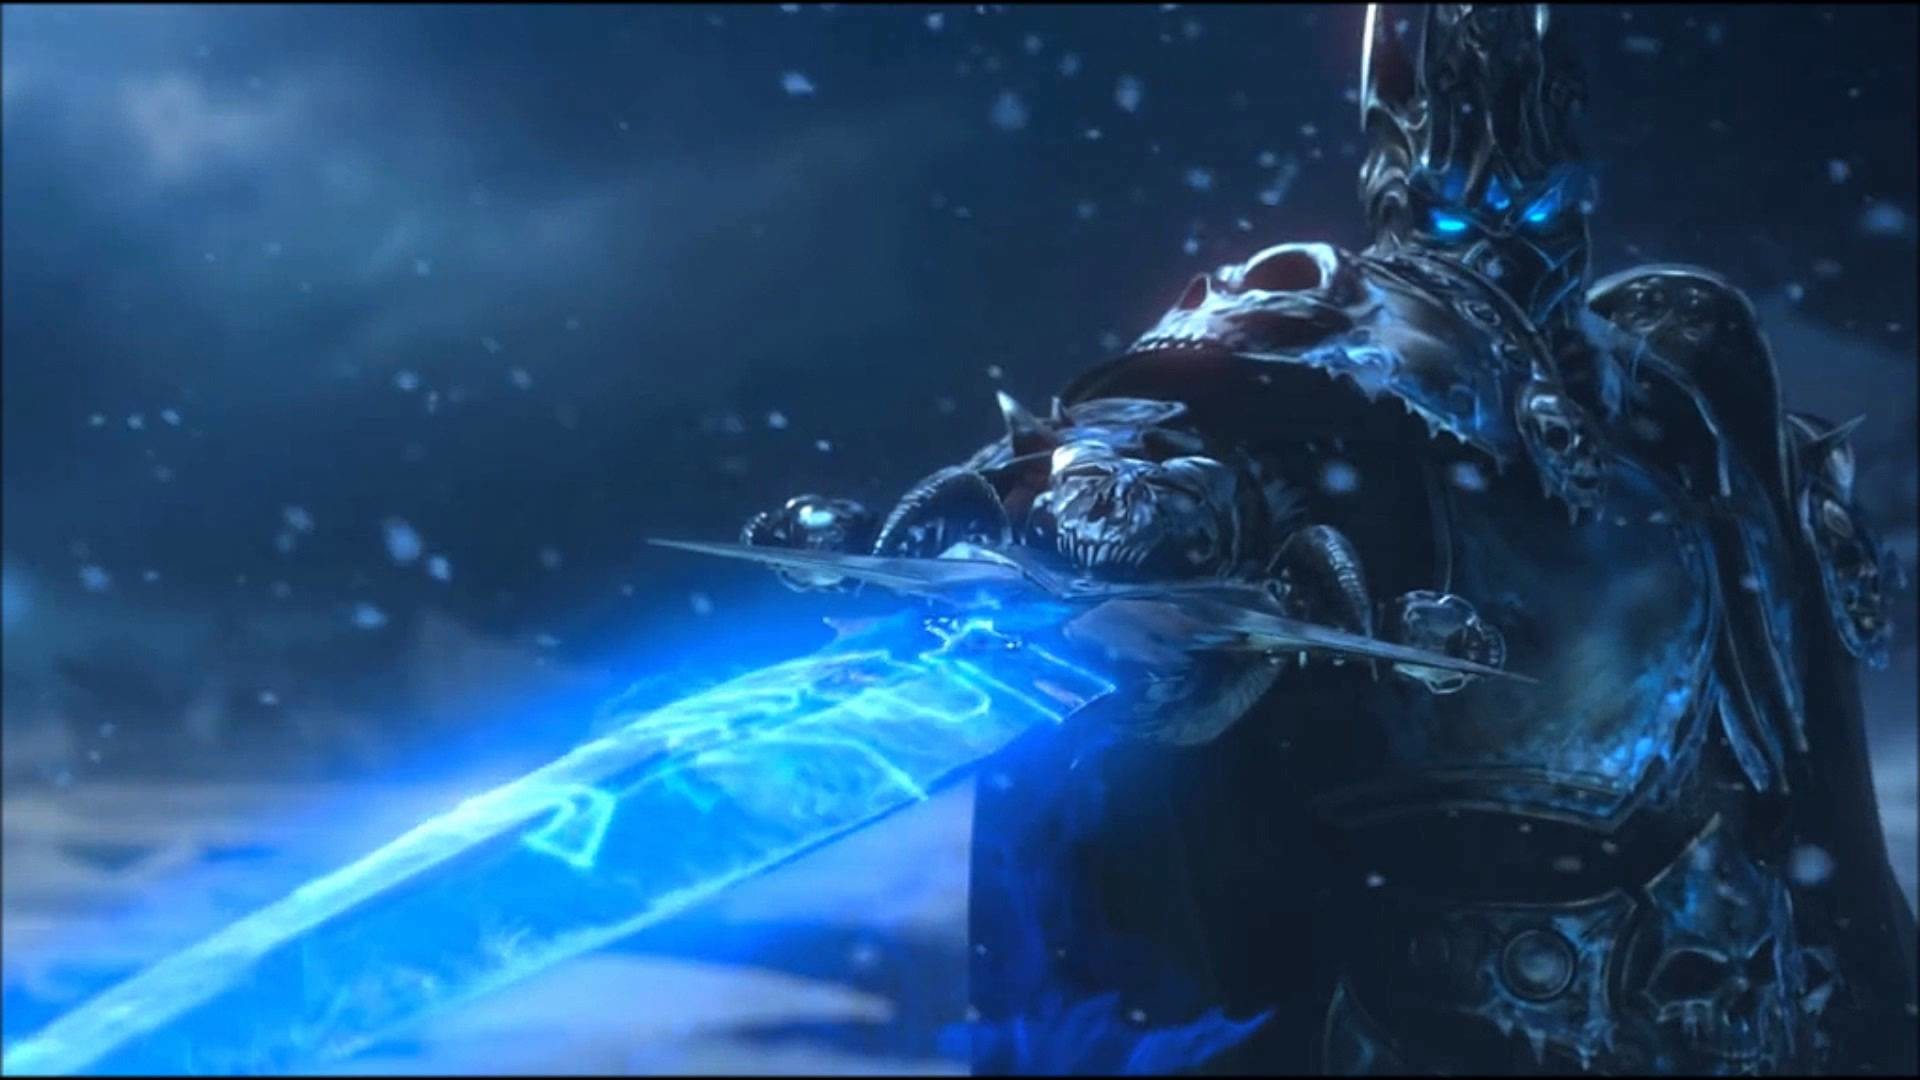 1920x1080 World of Warcraft: Wrath of the Lich King - Wrath of the Lich King - YouTube